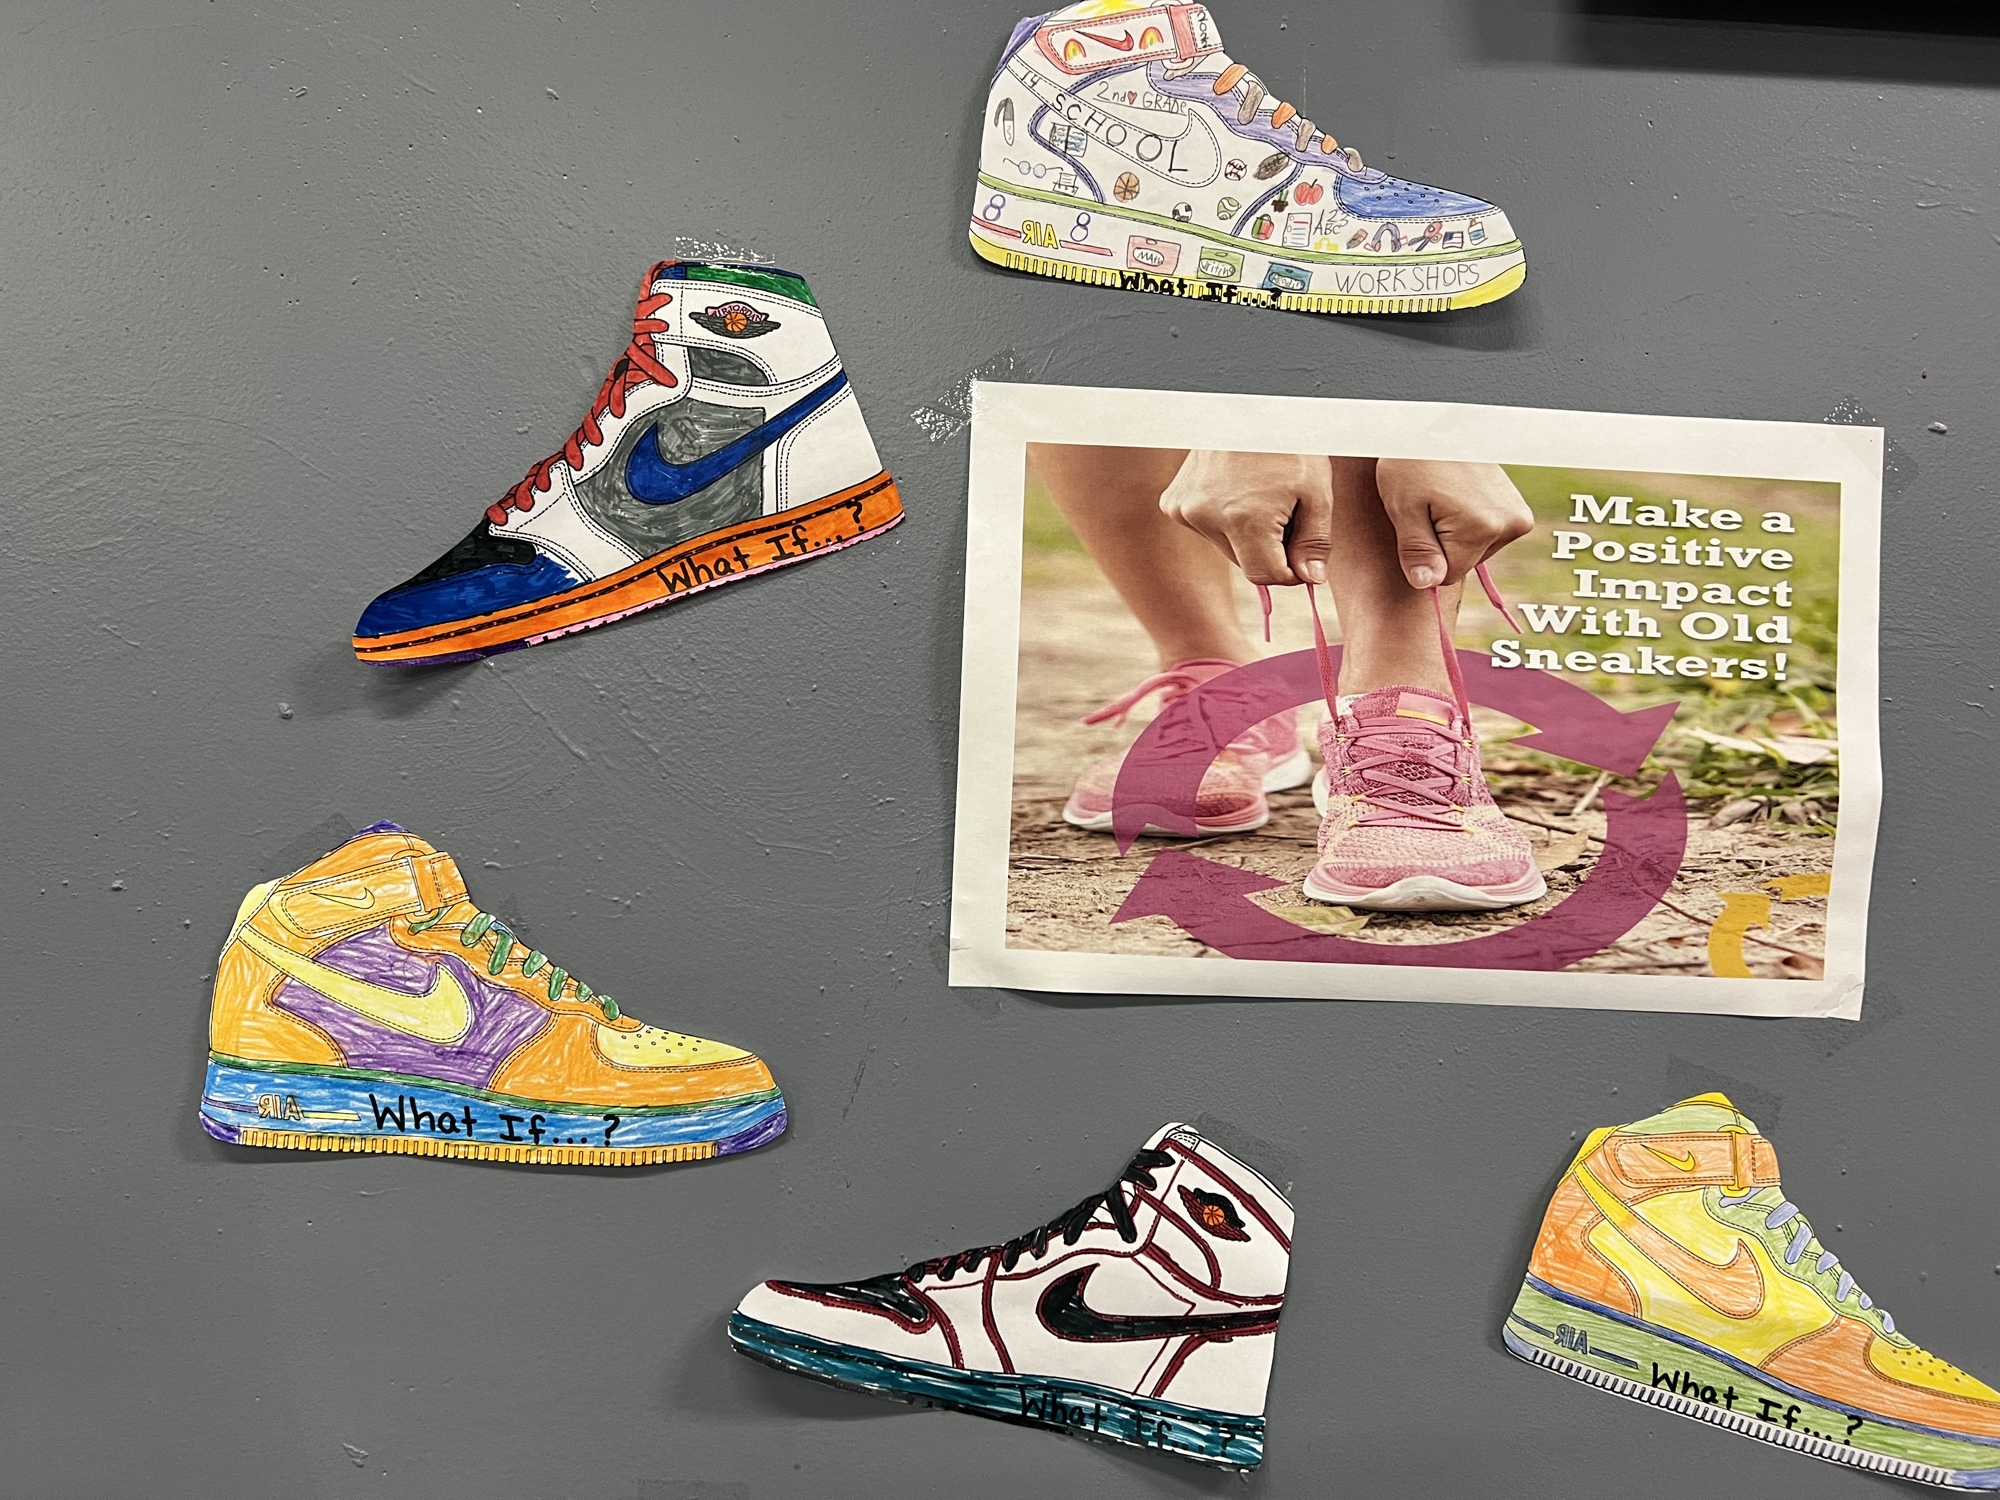 Students at Palm Coast Community School are looking for old shoes that be recycled for money, to suppor the 